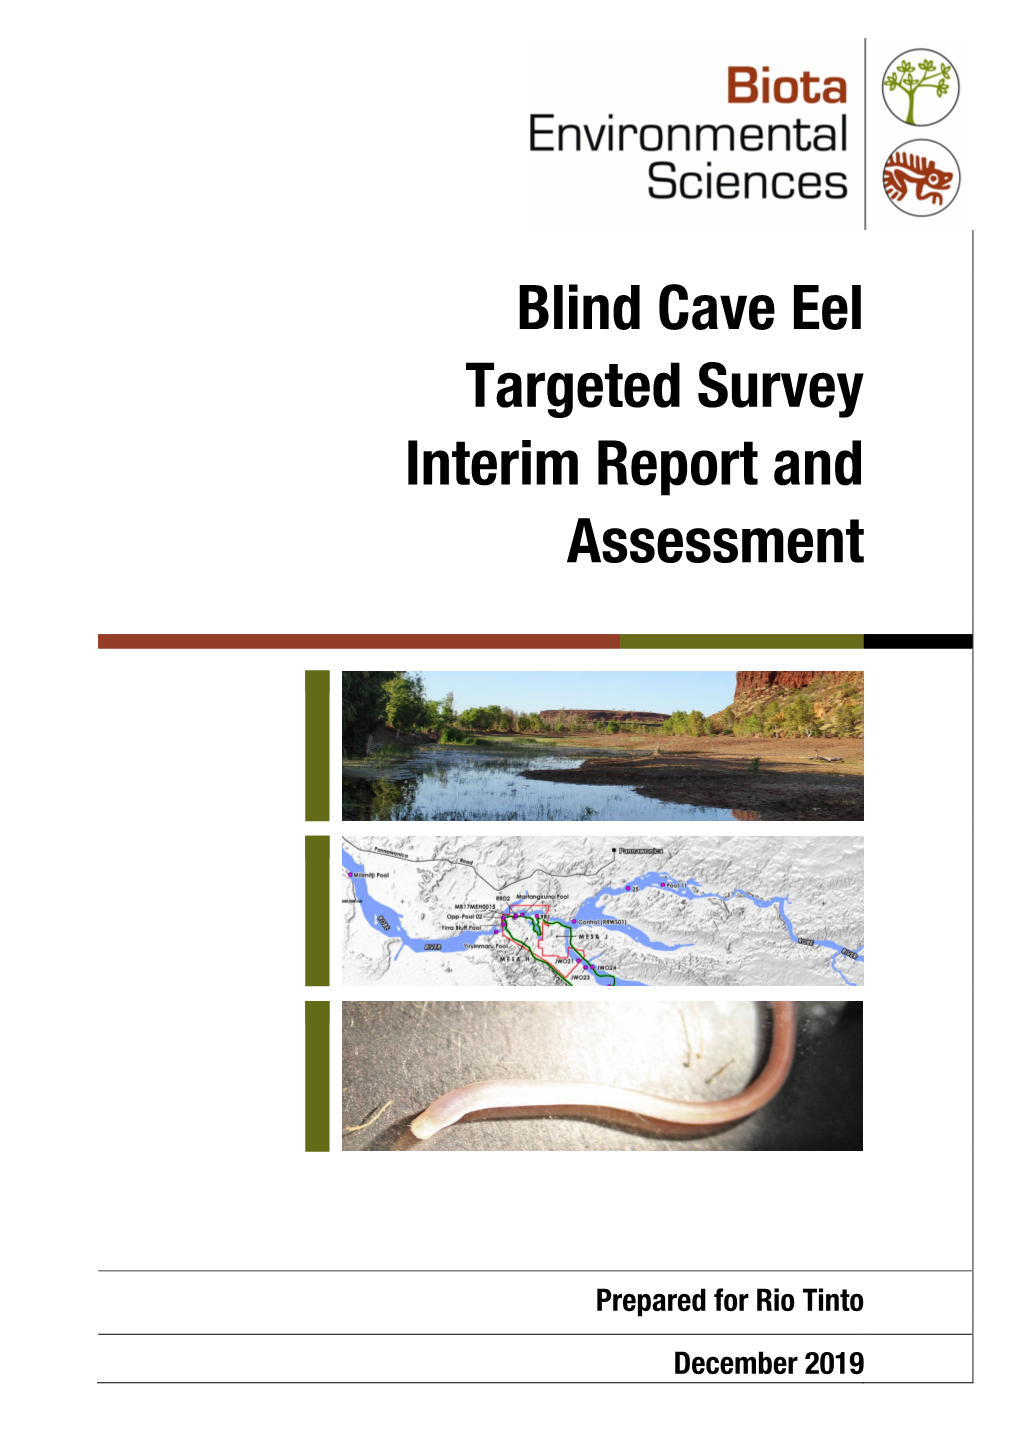 Blind Cave Eel Targeted Survey Interim Report and Assessment